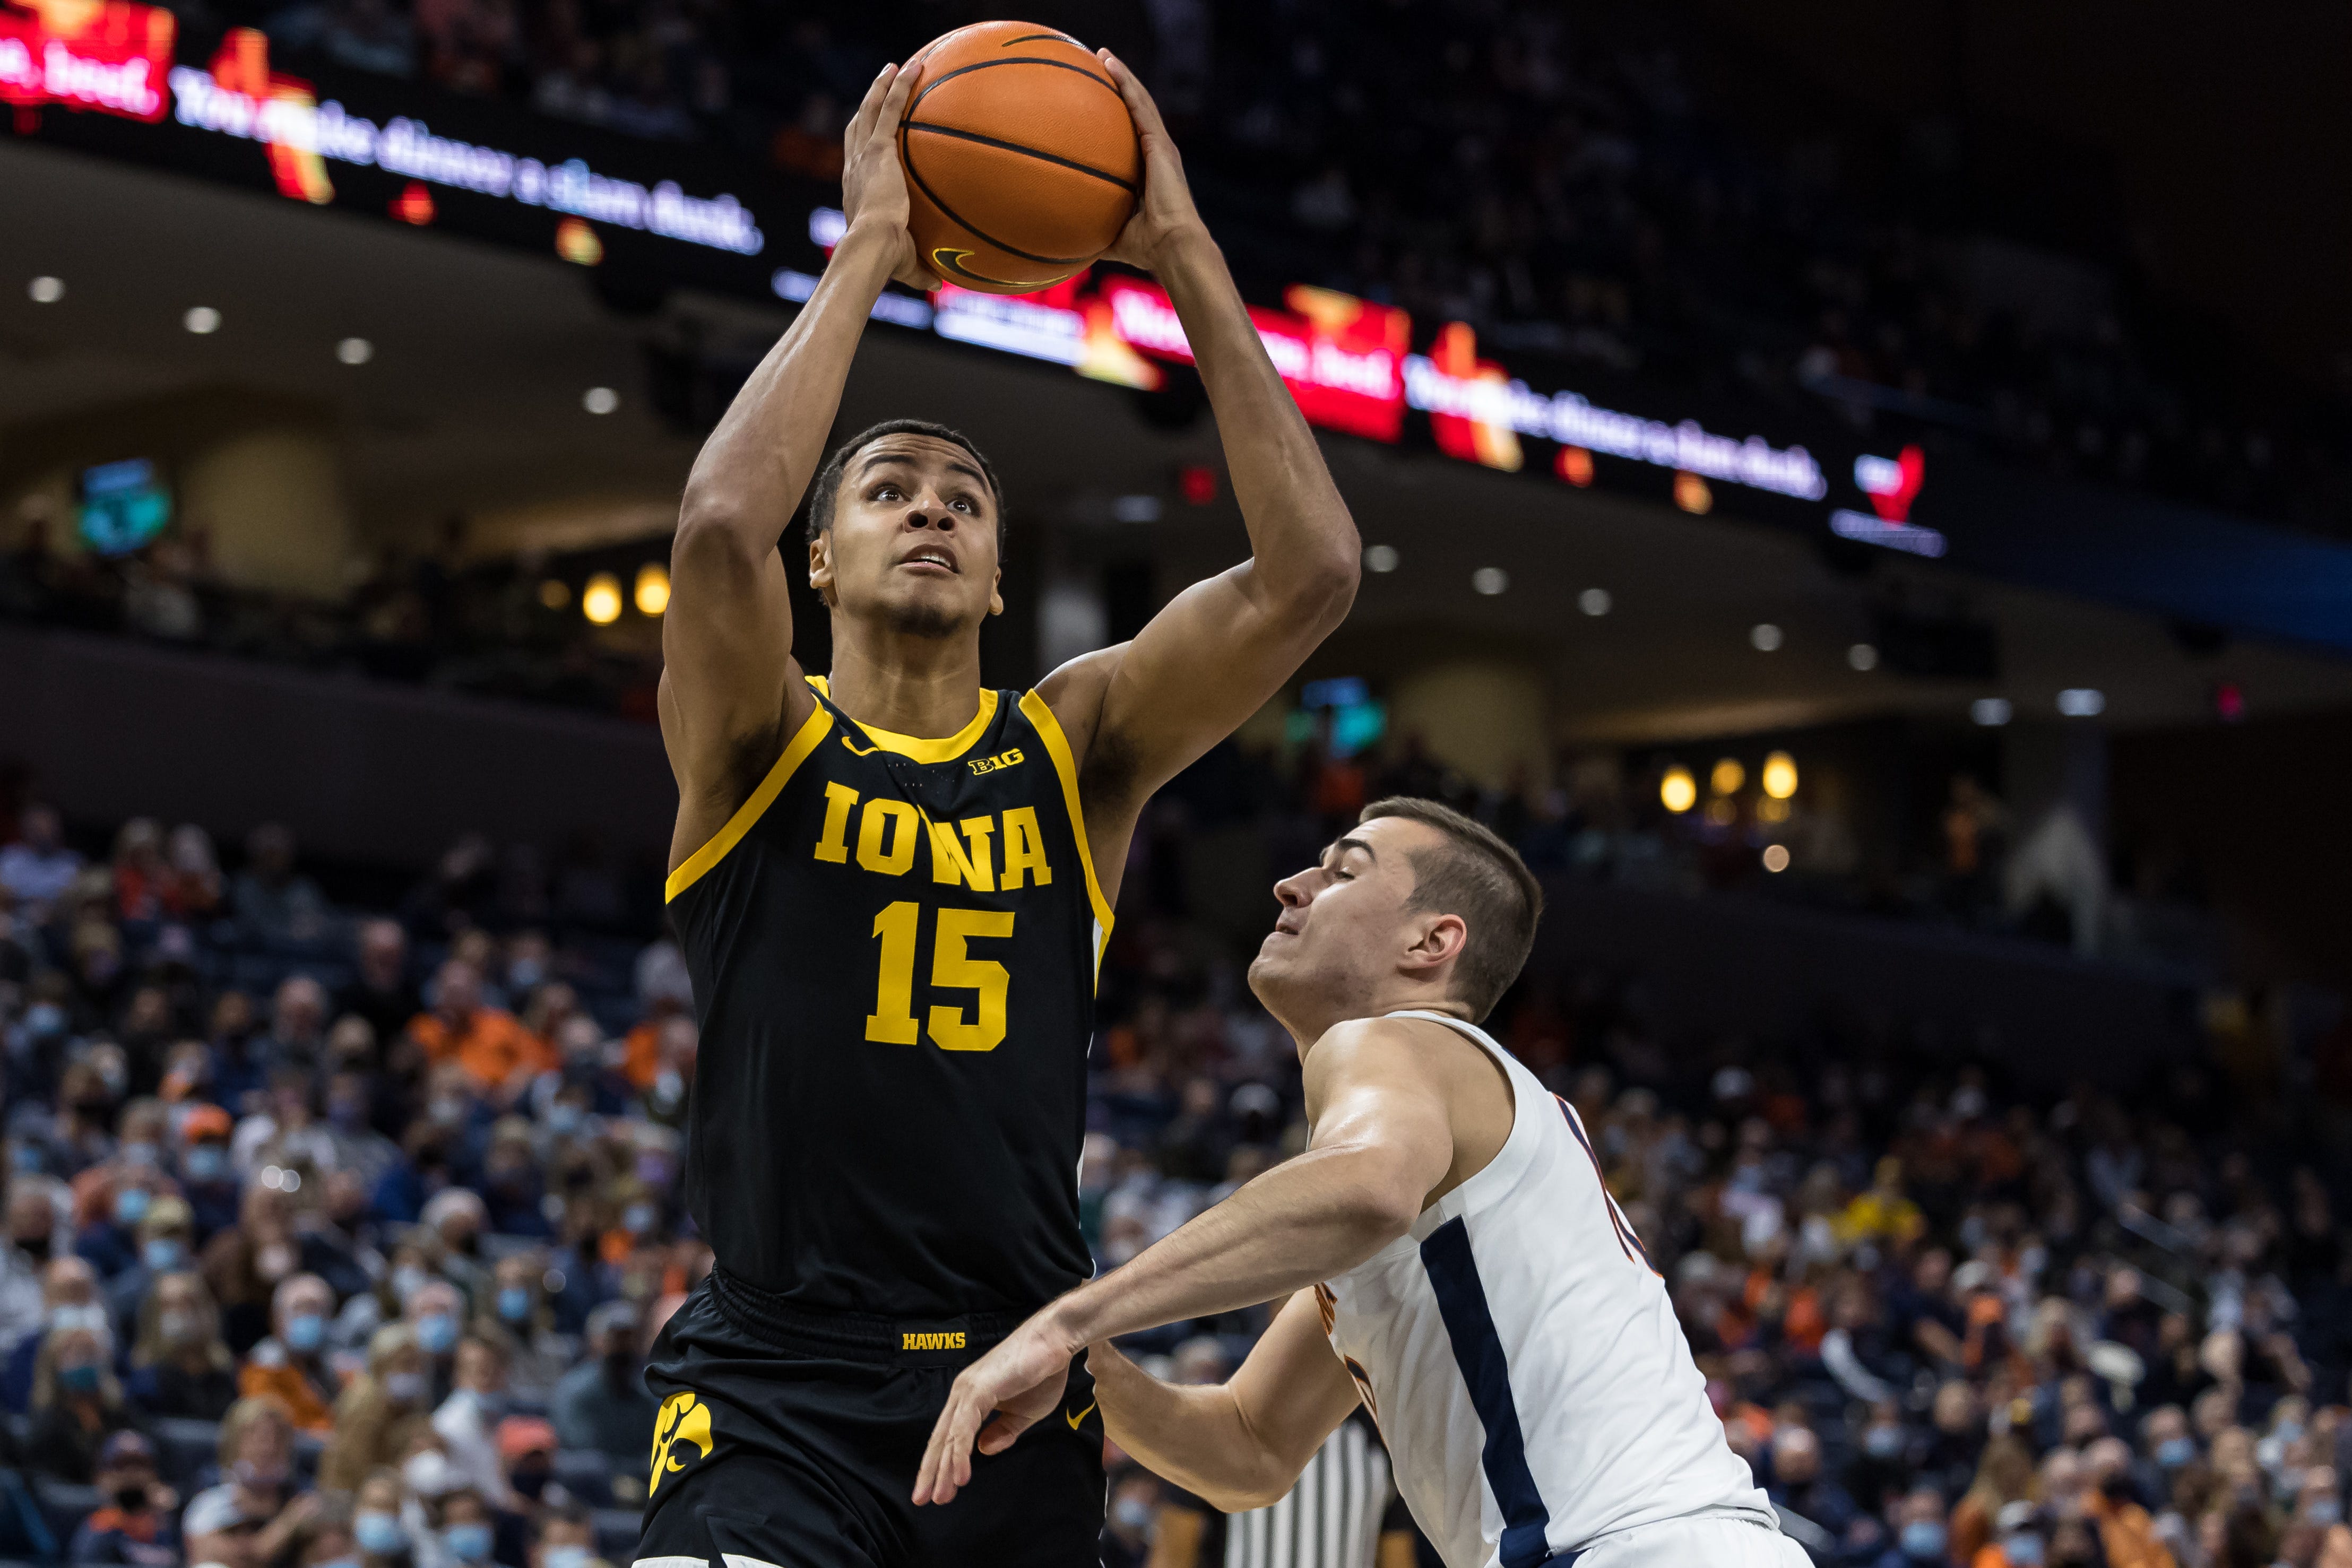 Iowa Hawkeyes forward Keegan Murray (15) goes to the basket against Virginia Cavaliers guard Taine Murray (10) during the first half, Monday, Nov. 29, 2021, at John Paul Jones Arena in Charlottesville, Va.